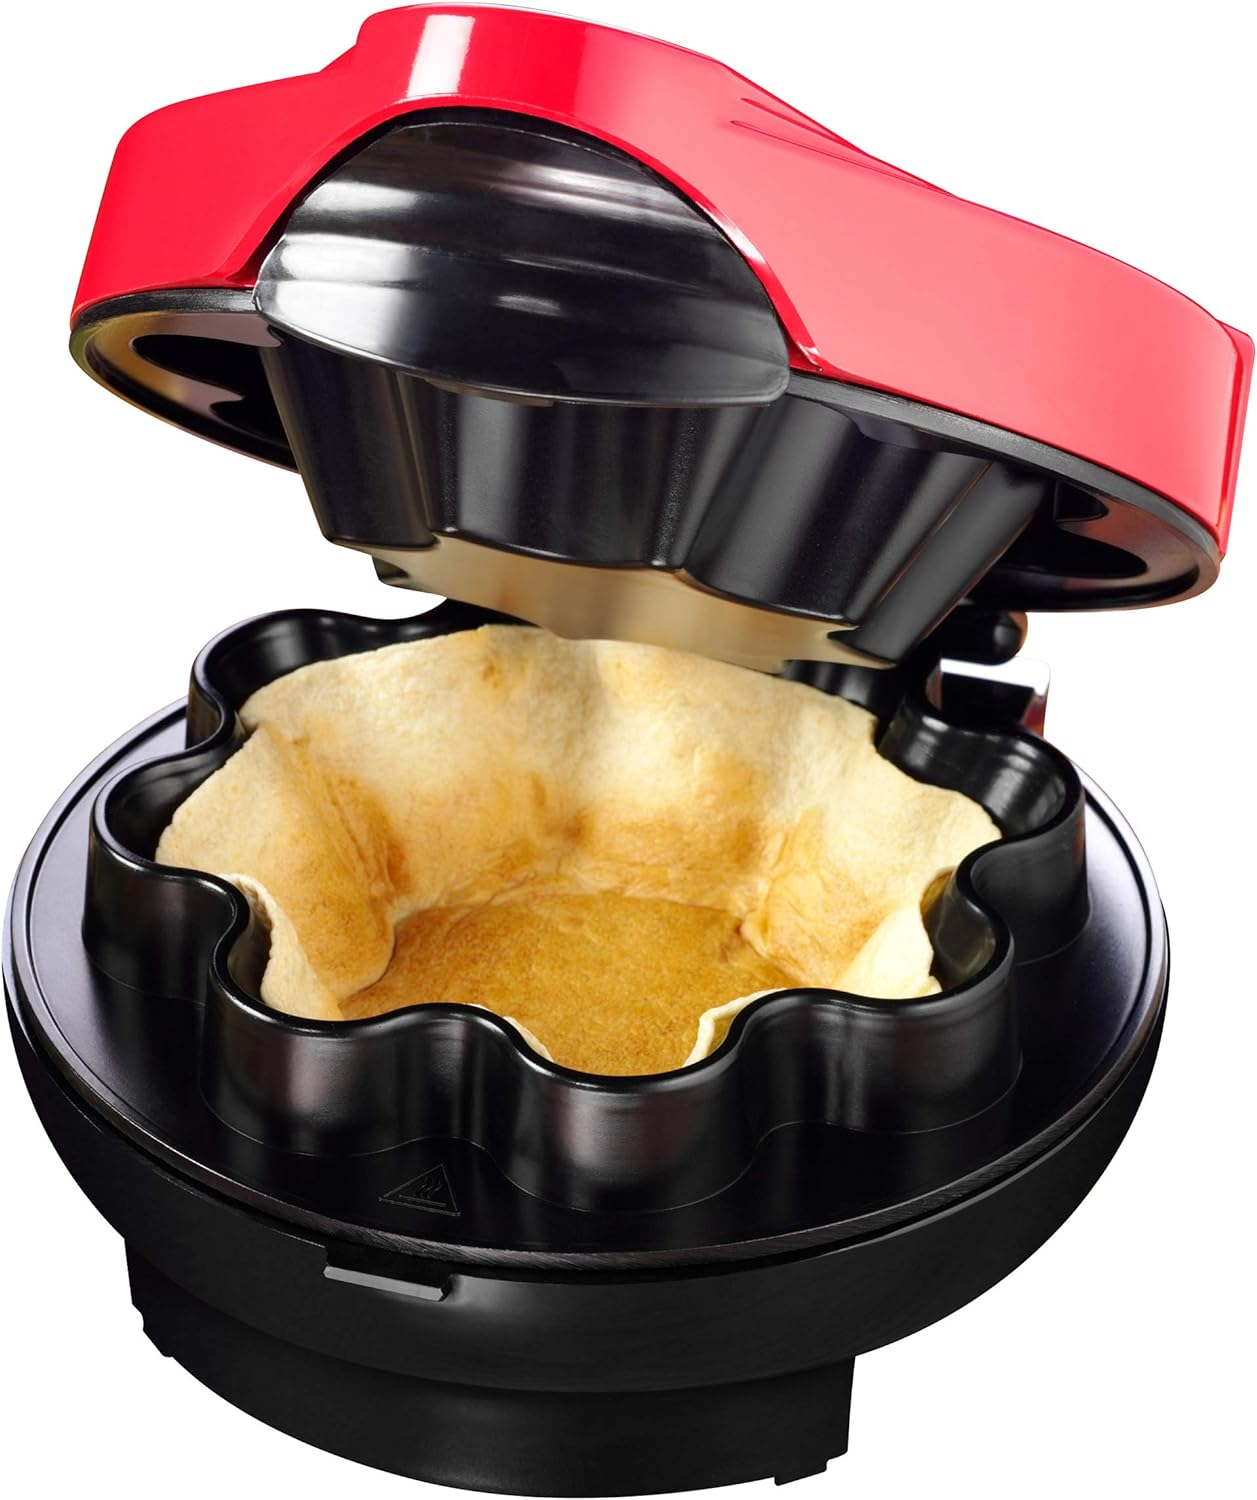 Nostalgia Taco Tuesday Tortilla Bowl Maker For Baked Taco Bowls, Tostadas, Salads, Dips, Appetizers, and Desserts, 8 to 10 Inch Tortillas, Red - Barbecue Whizz...Watch My Smoke!